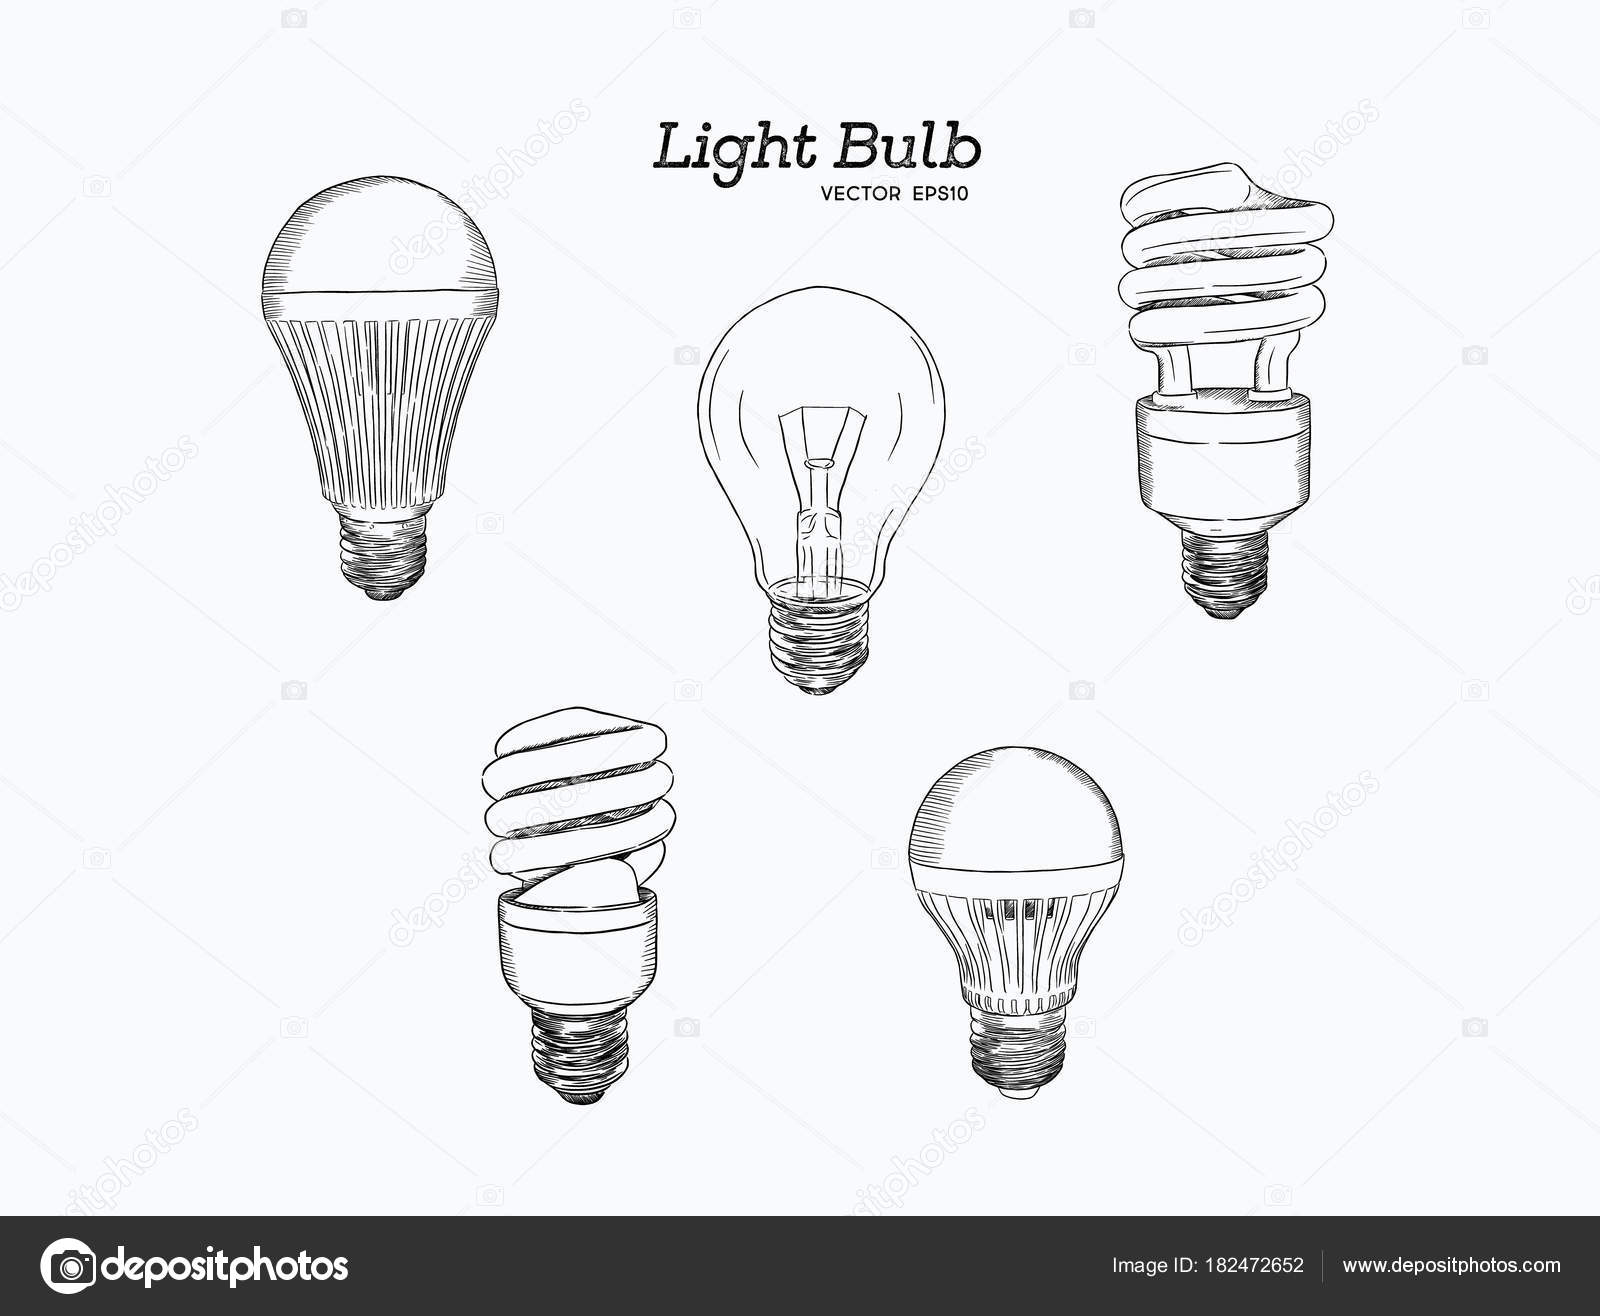 Lights Lamps Sketch Set Hand Drawn Vector Set Different Lamps